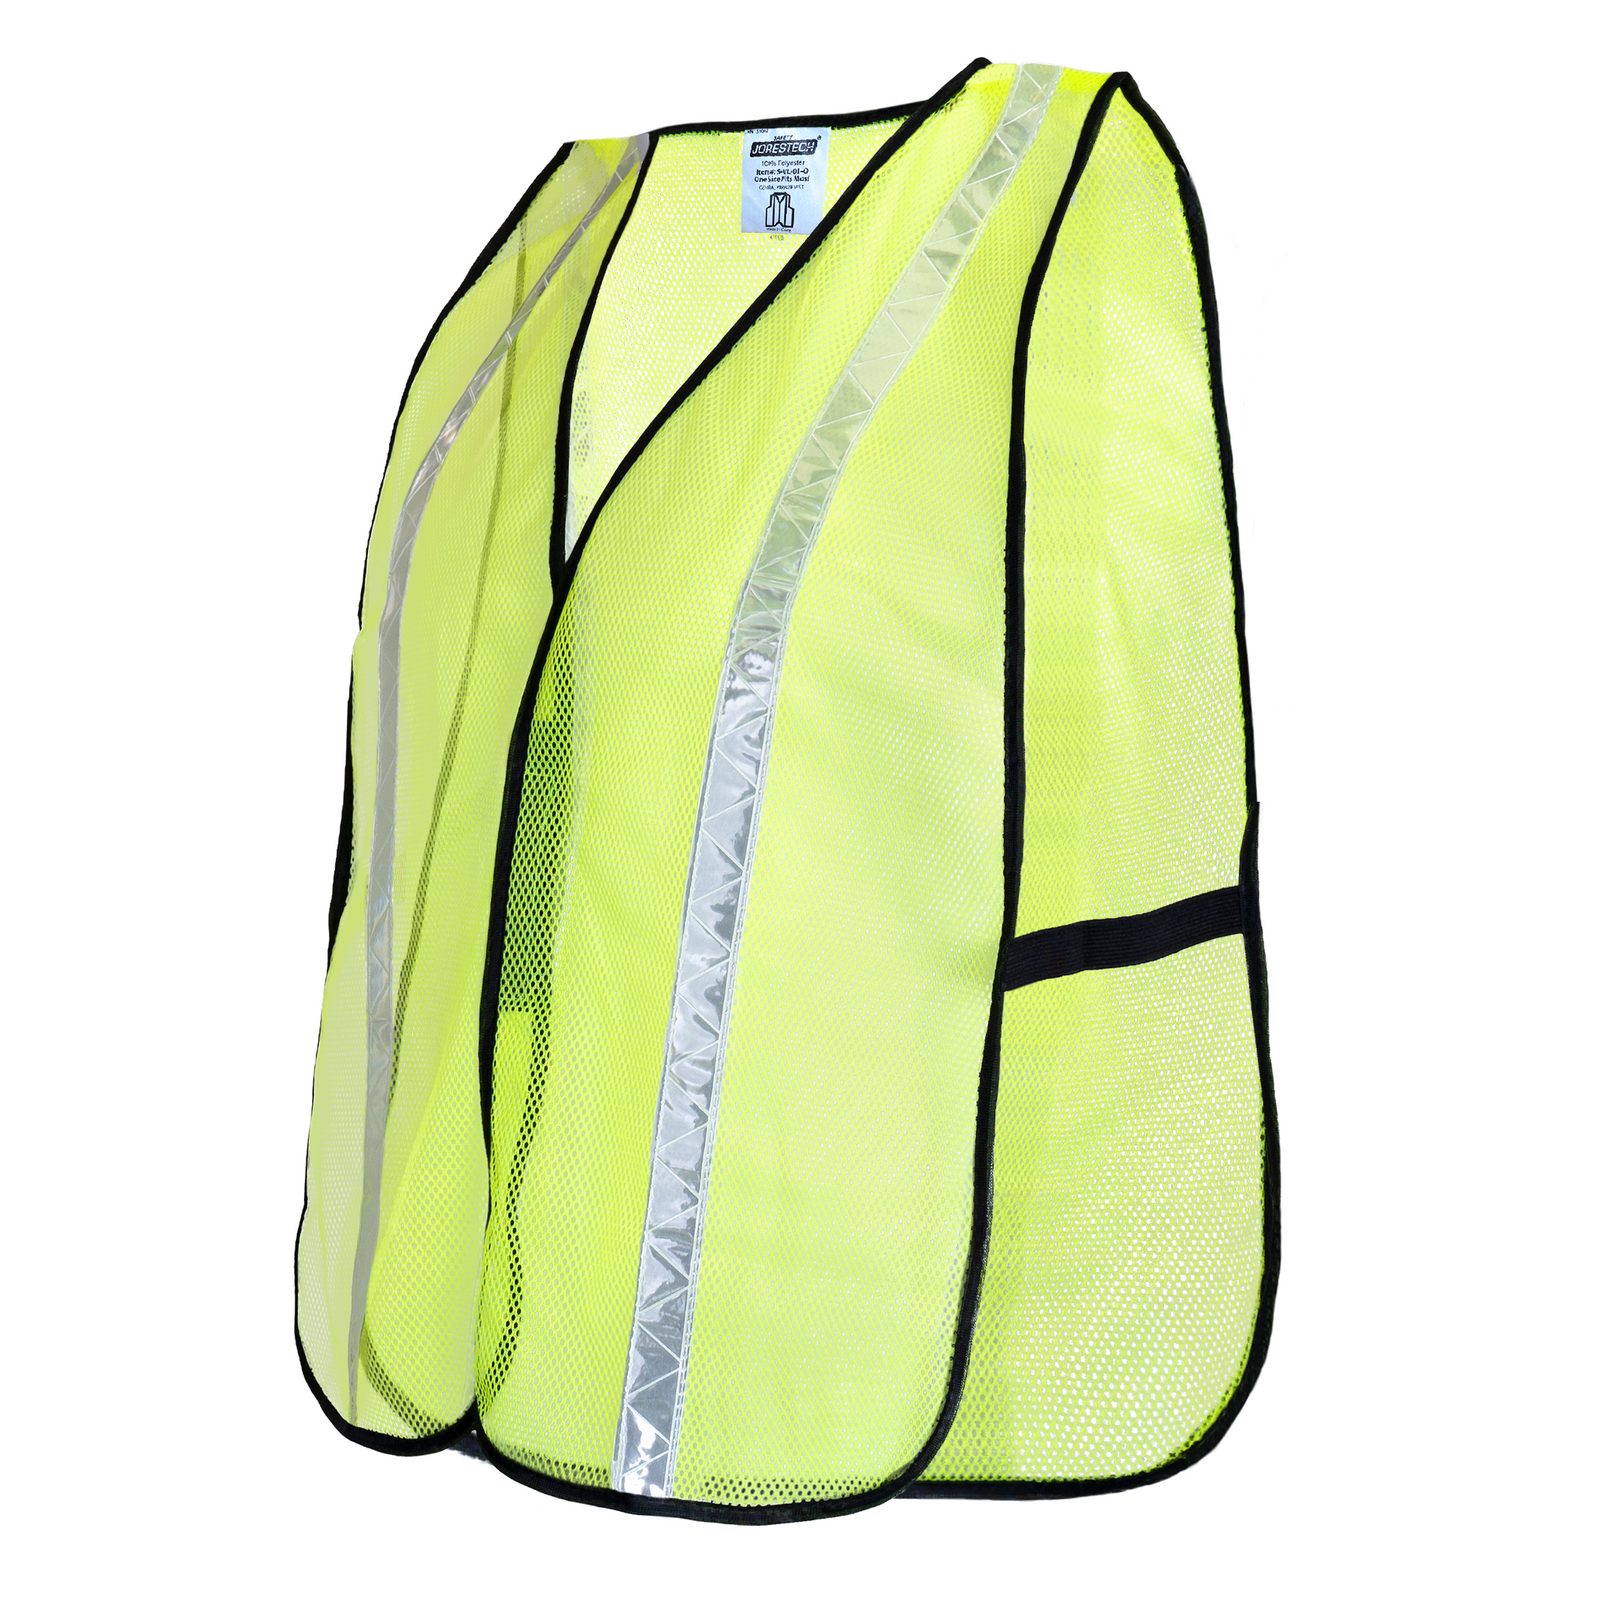 Features a one size fits most high visibility yellow lime mesh safety vest with 1 inch reflective strip and side elastic straps